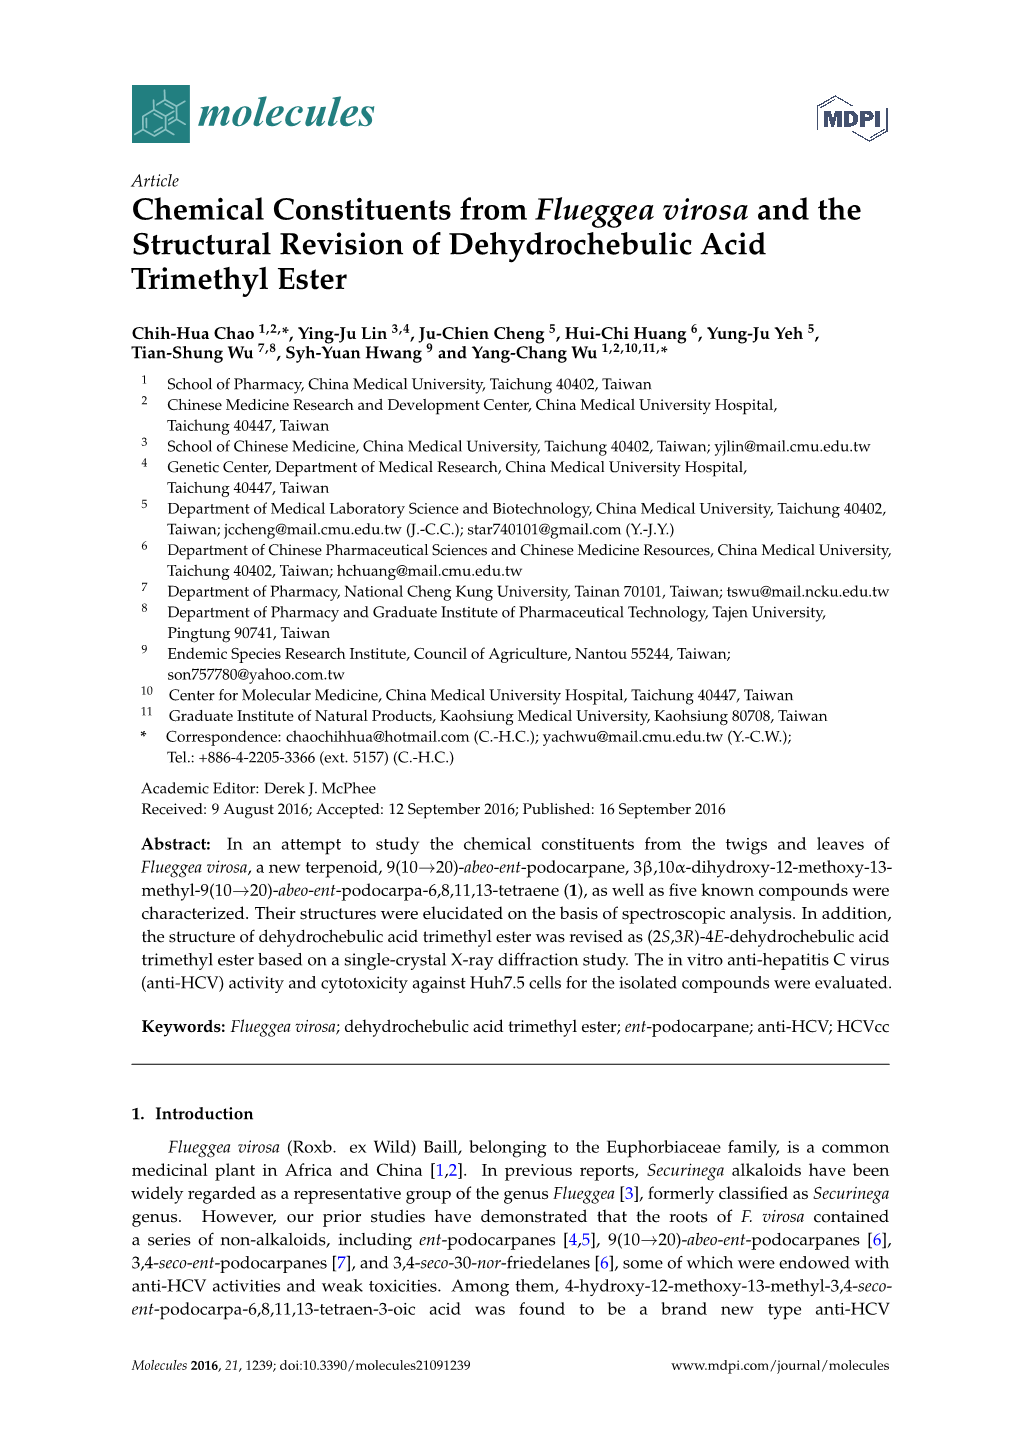 Chemical Constituents from Flueggea Virosa and the Structural Revision of Dehydrochebulic Acid Trimethyl Ester